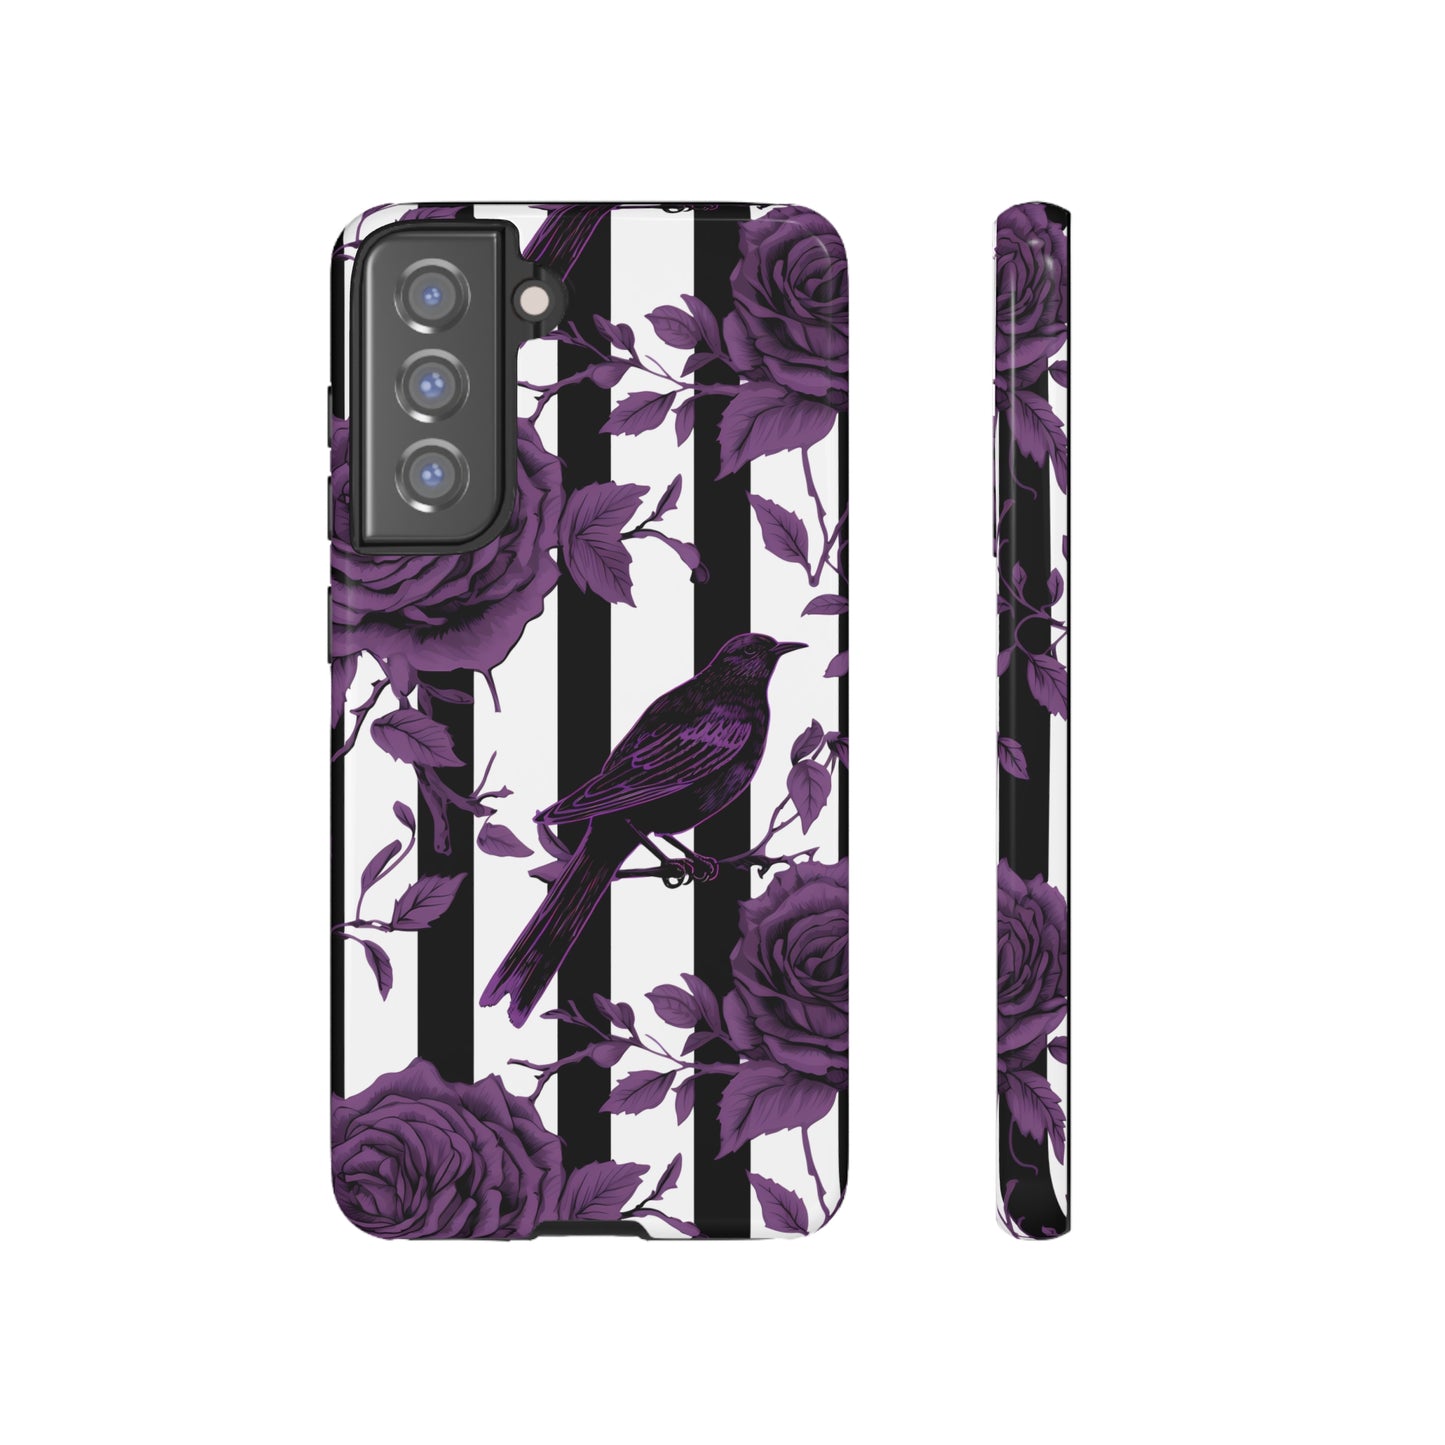 Striped Crows and Roses Tough Cases for iPhone Samsung Google PhonesPhone CaseVTZdesignsSamsung Galaxy S21 FEGlossyAccessoriescrowsGlossy